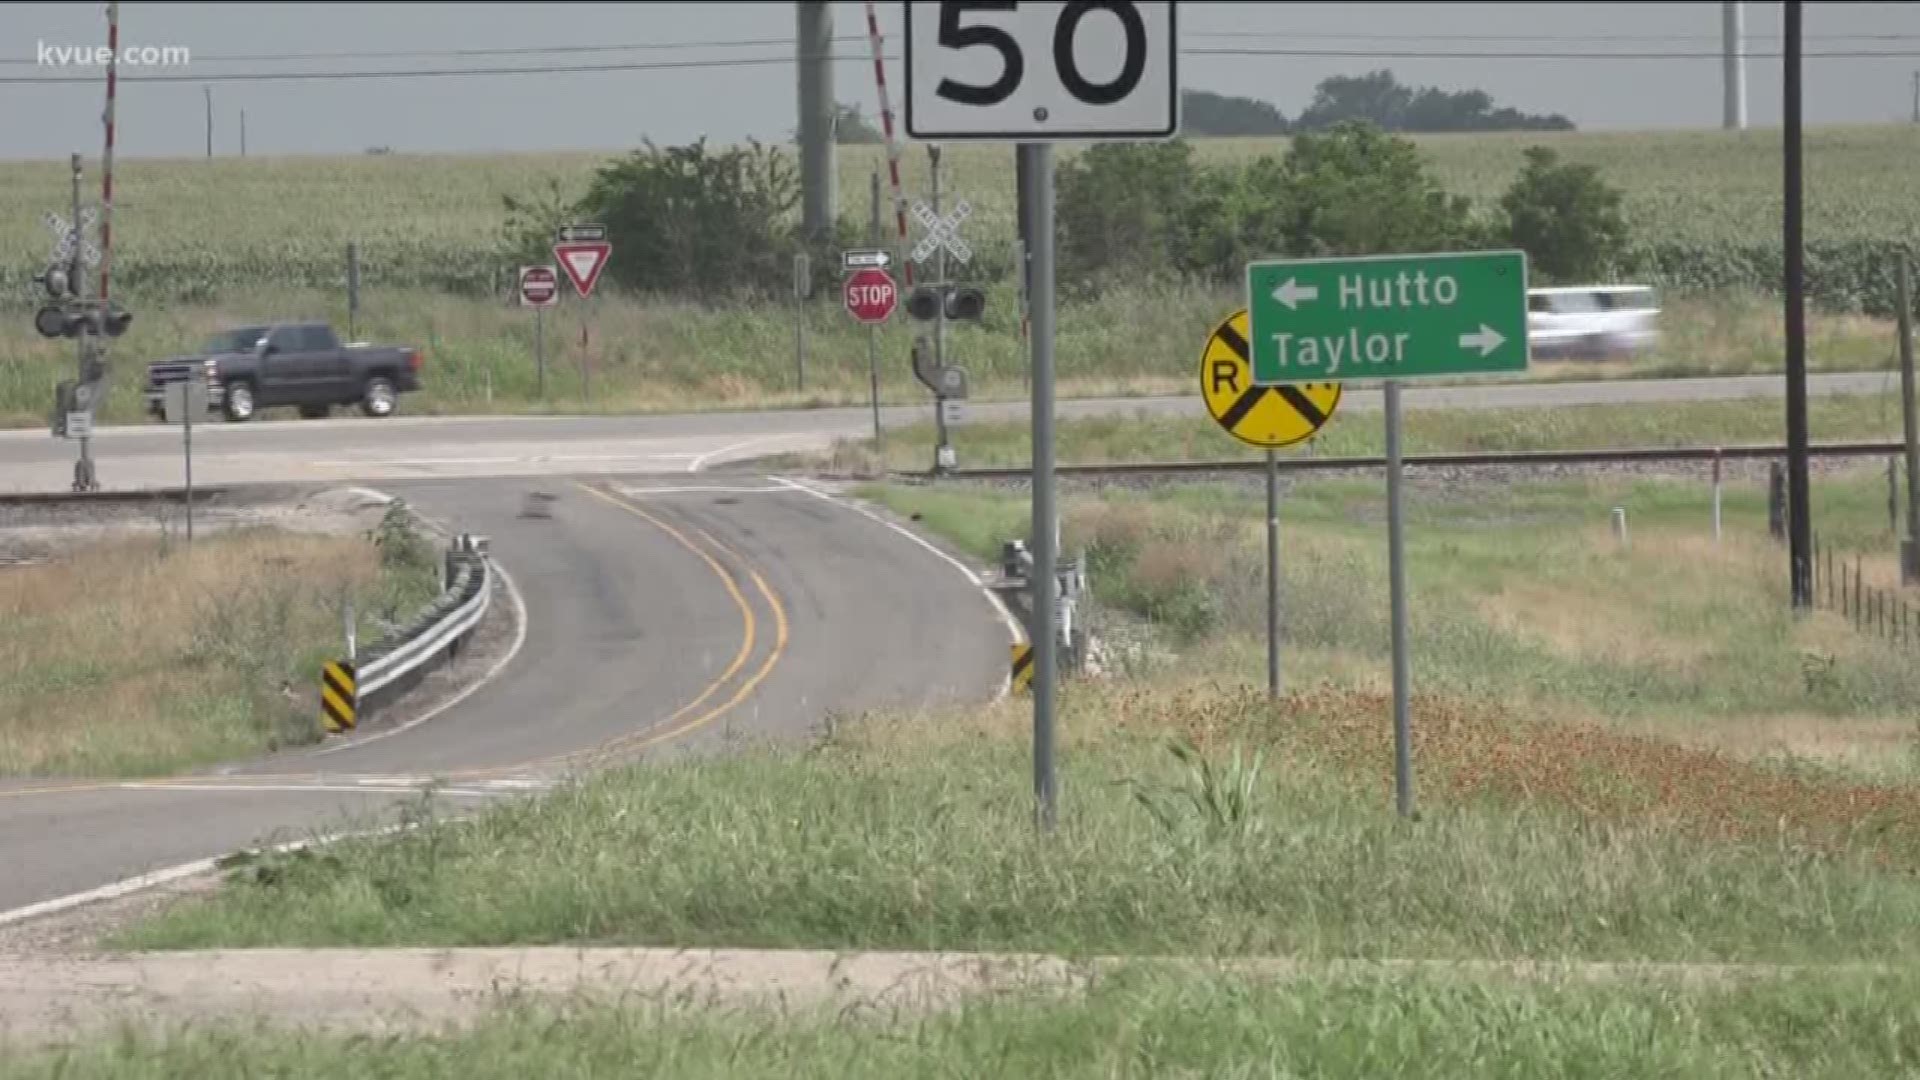 WilCo officials want to reduce traffic between Hutto and Taylor by building an alternative to Highway 79 that would connect Highway 130 to FM 3349.